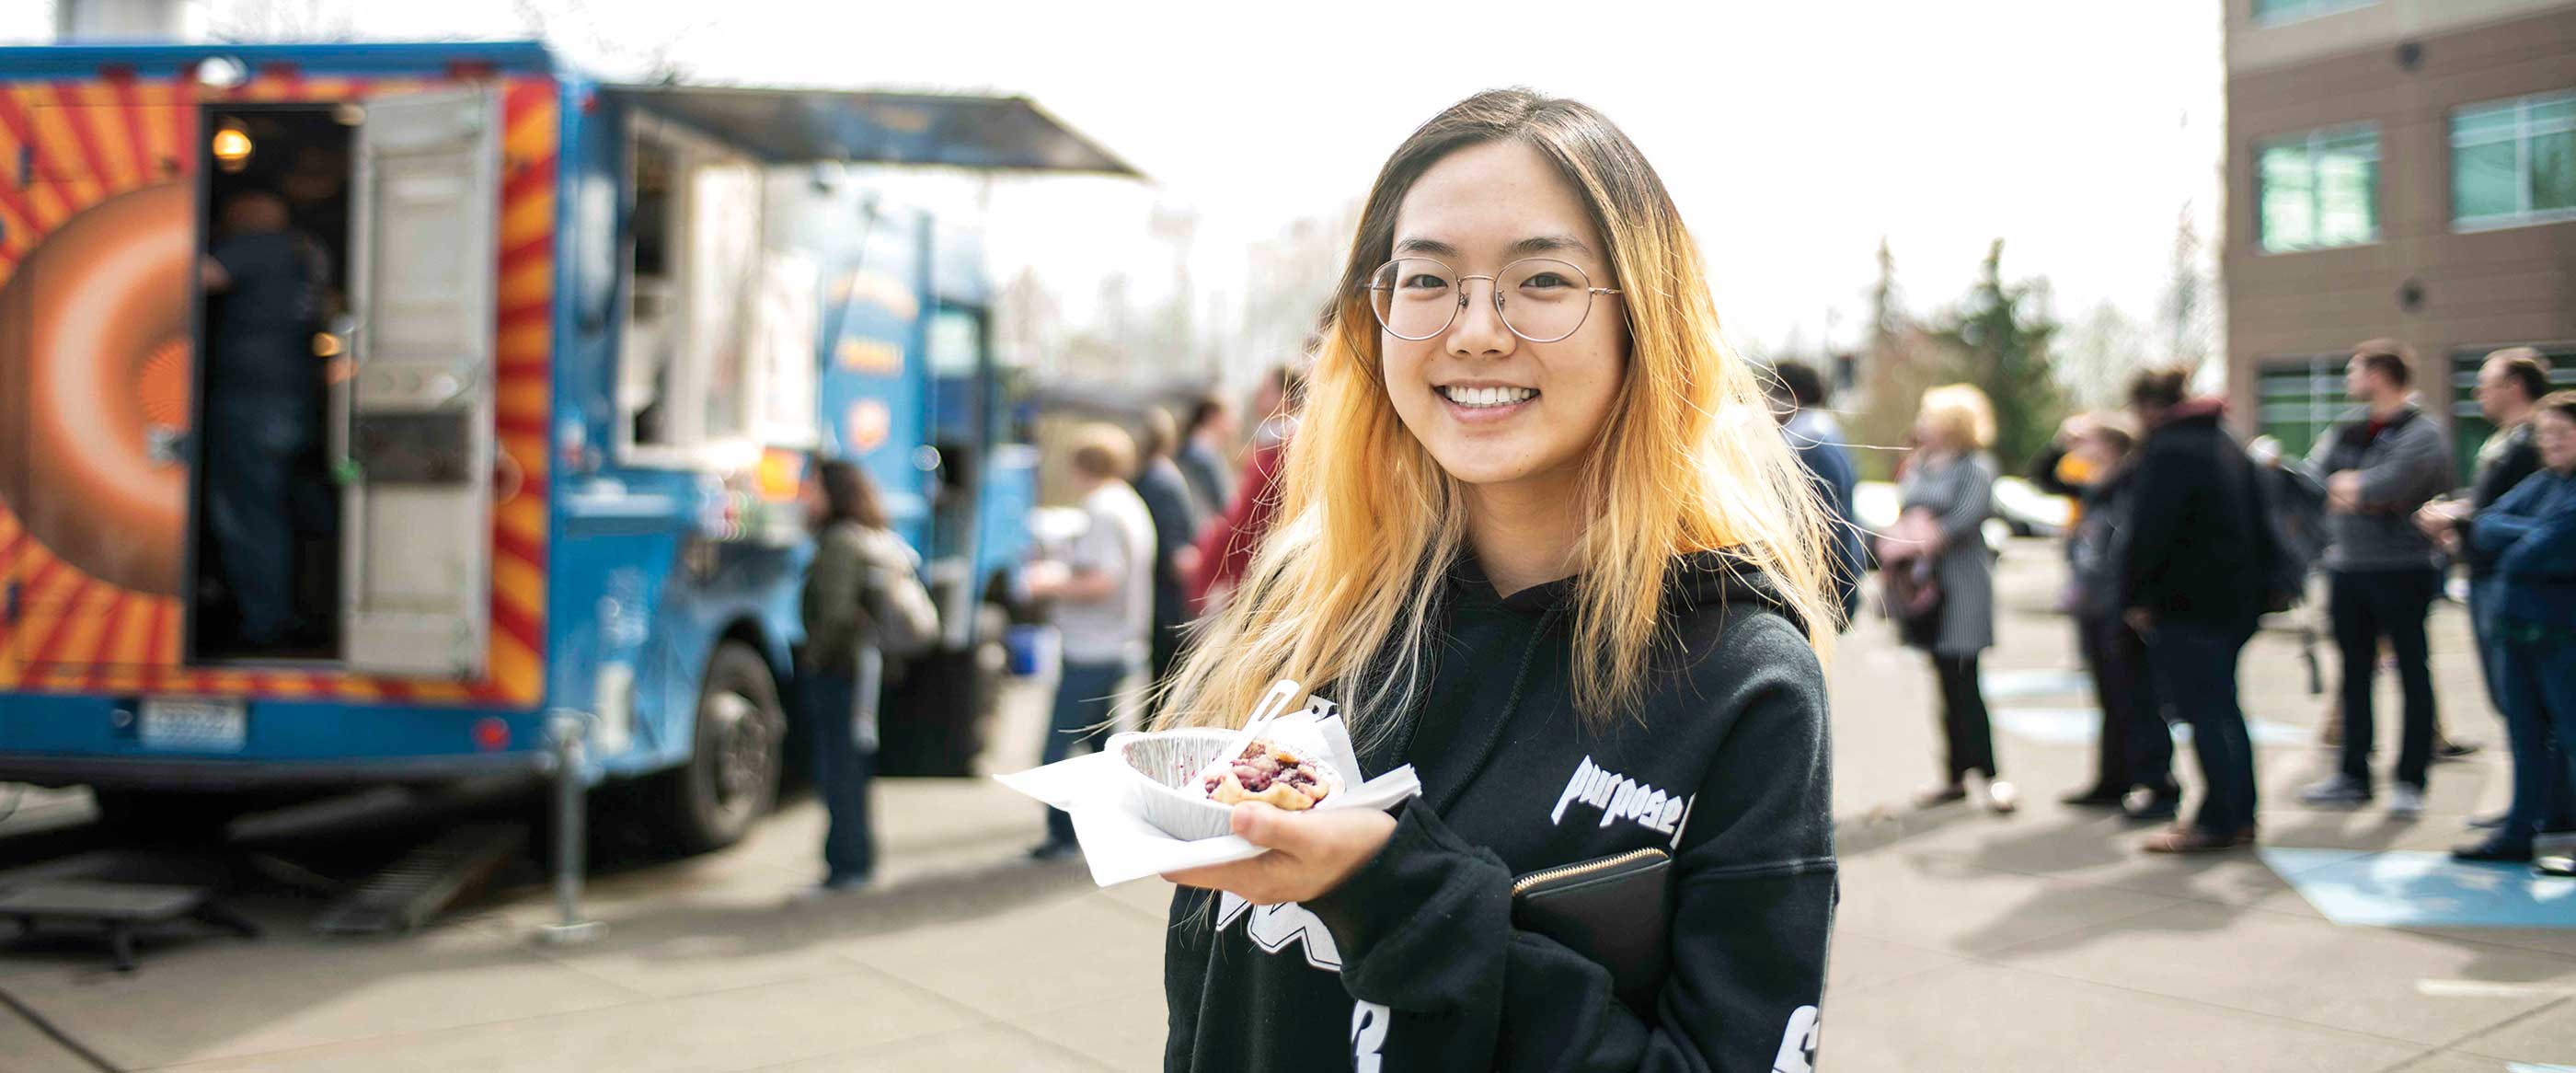 A DigiPen student smiles while eating pie in front of a food truck on campus.